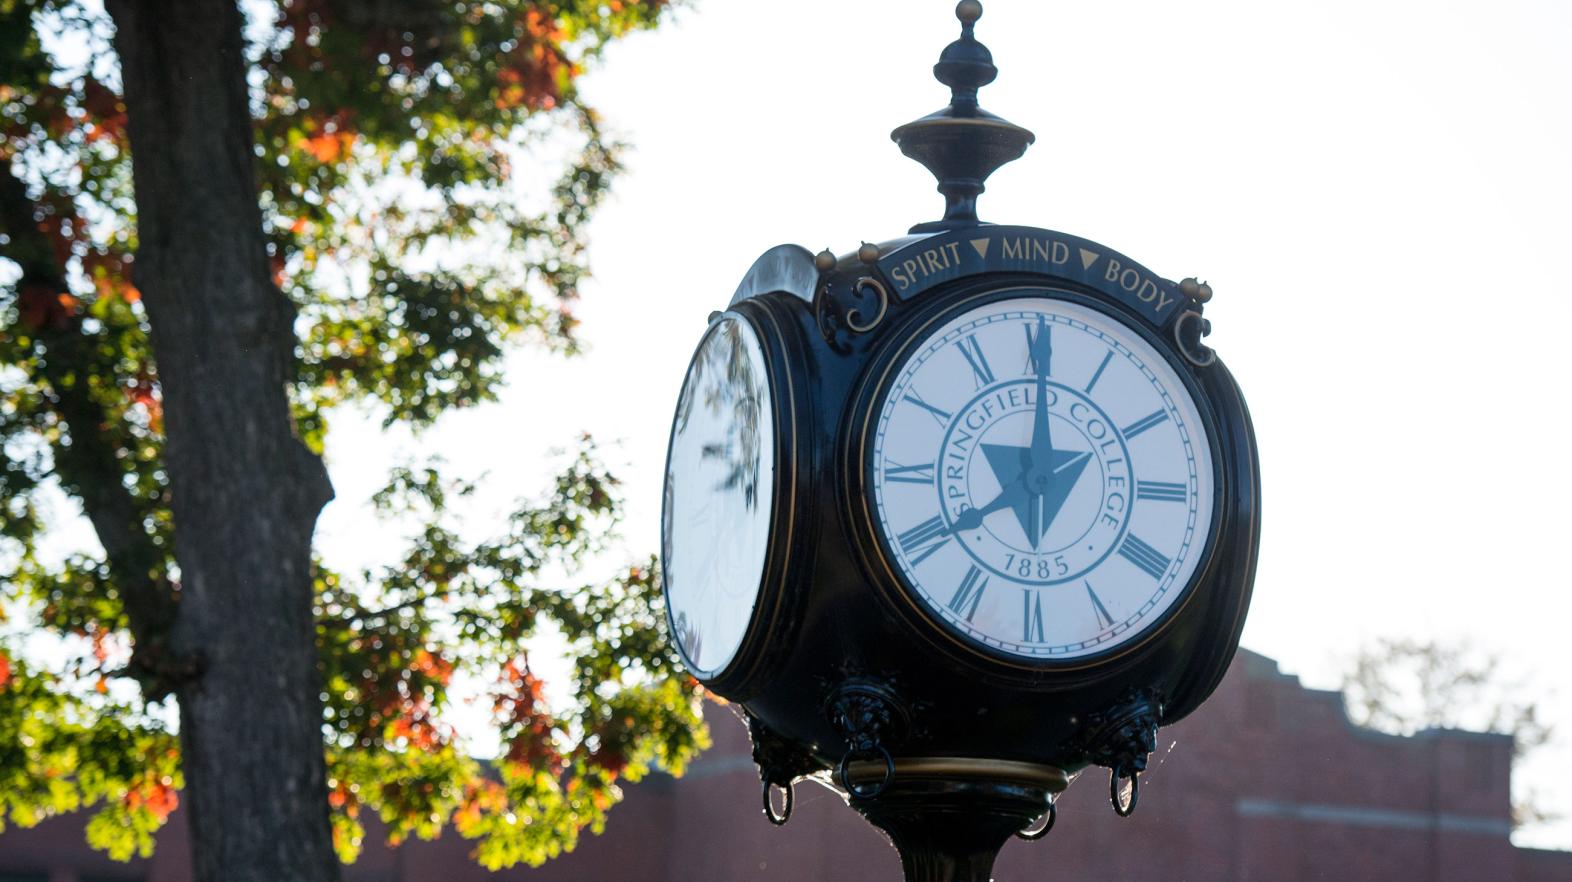 The Springfield College campus clock, reading spirit, mind, and body on it.